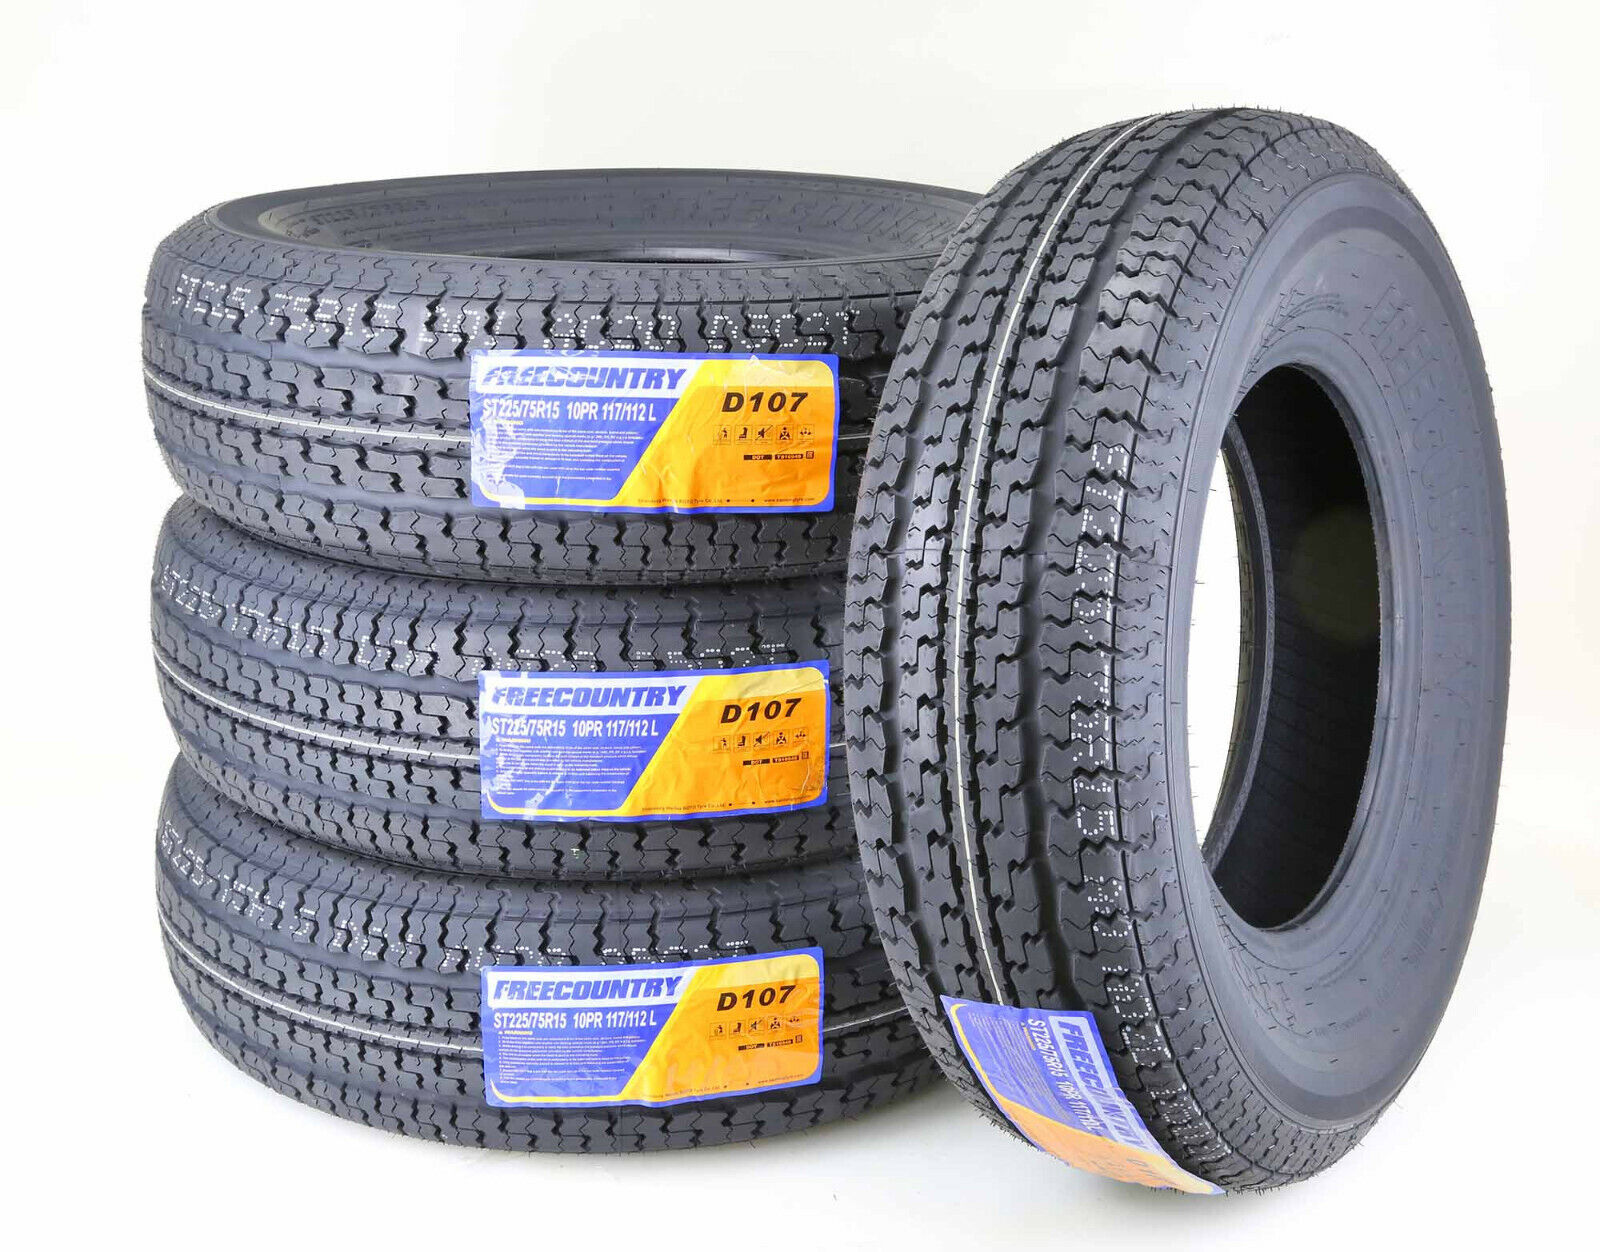 4PC Trailer Tires ST225/75R15 Free Country Radial 10 Ply LR E w/Scuff Guard